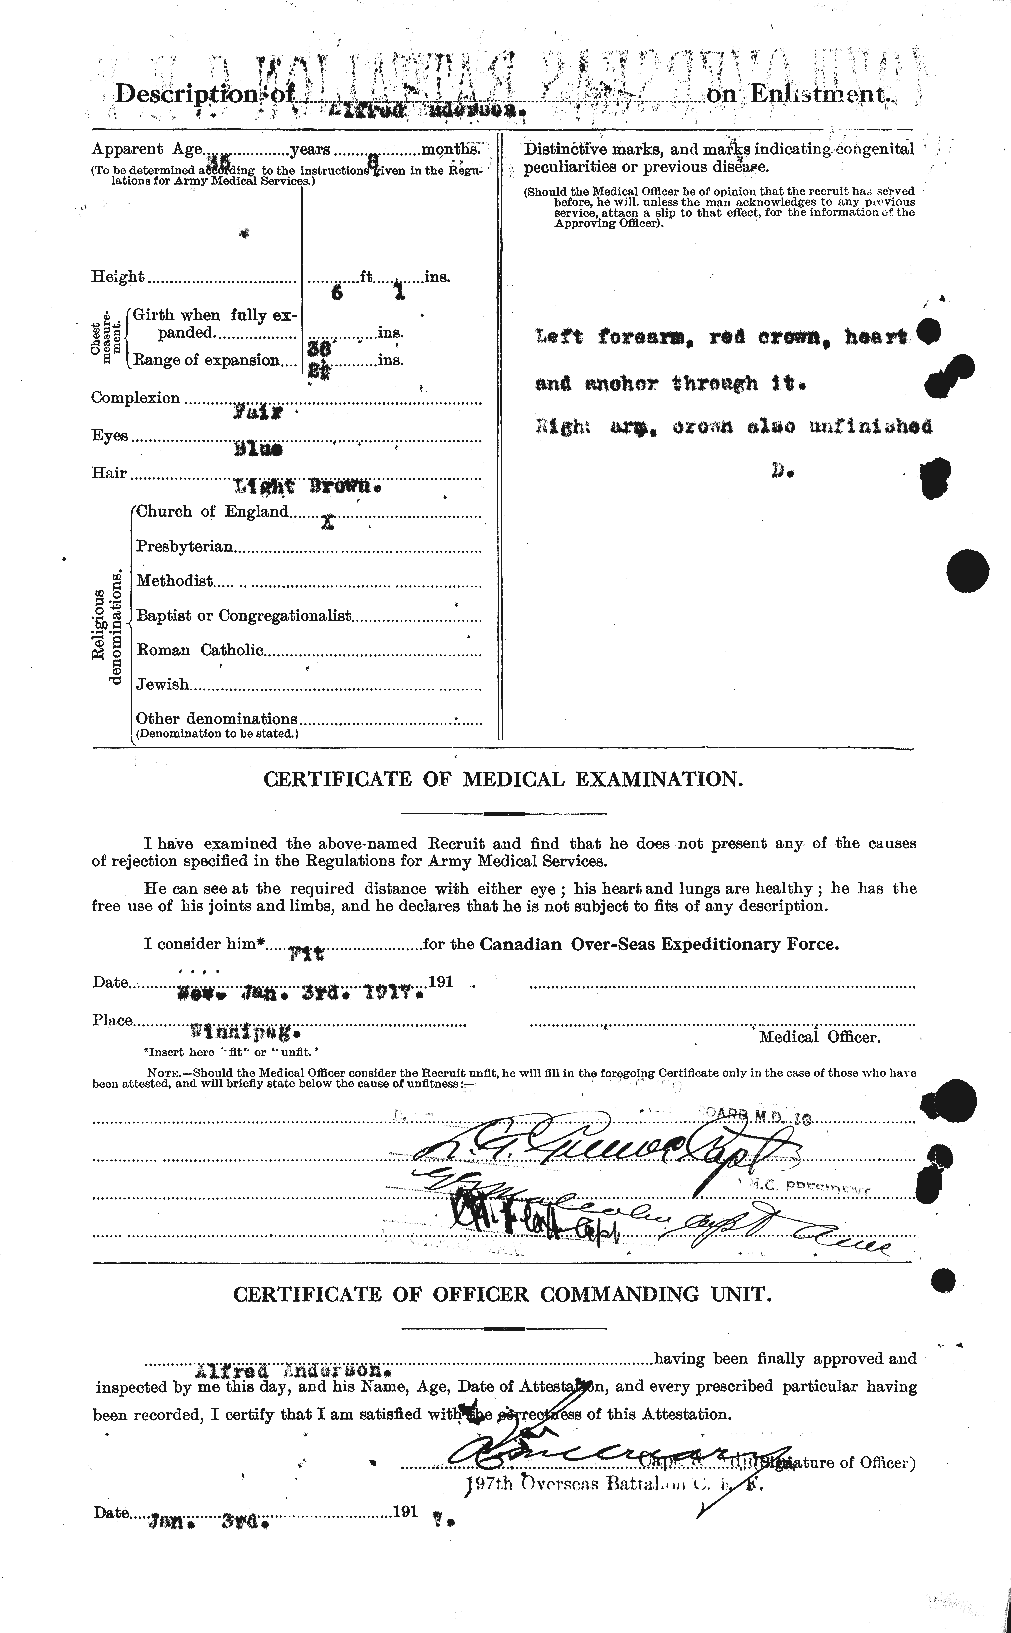 Personnel Records of the First World War - CEF 209462b